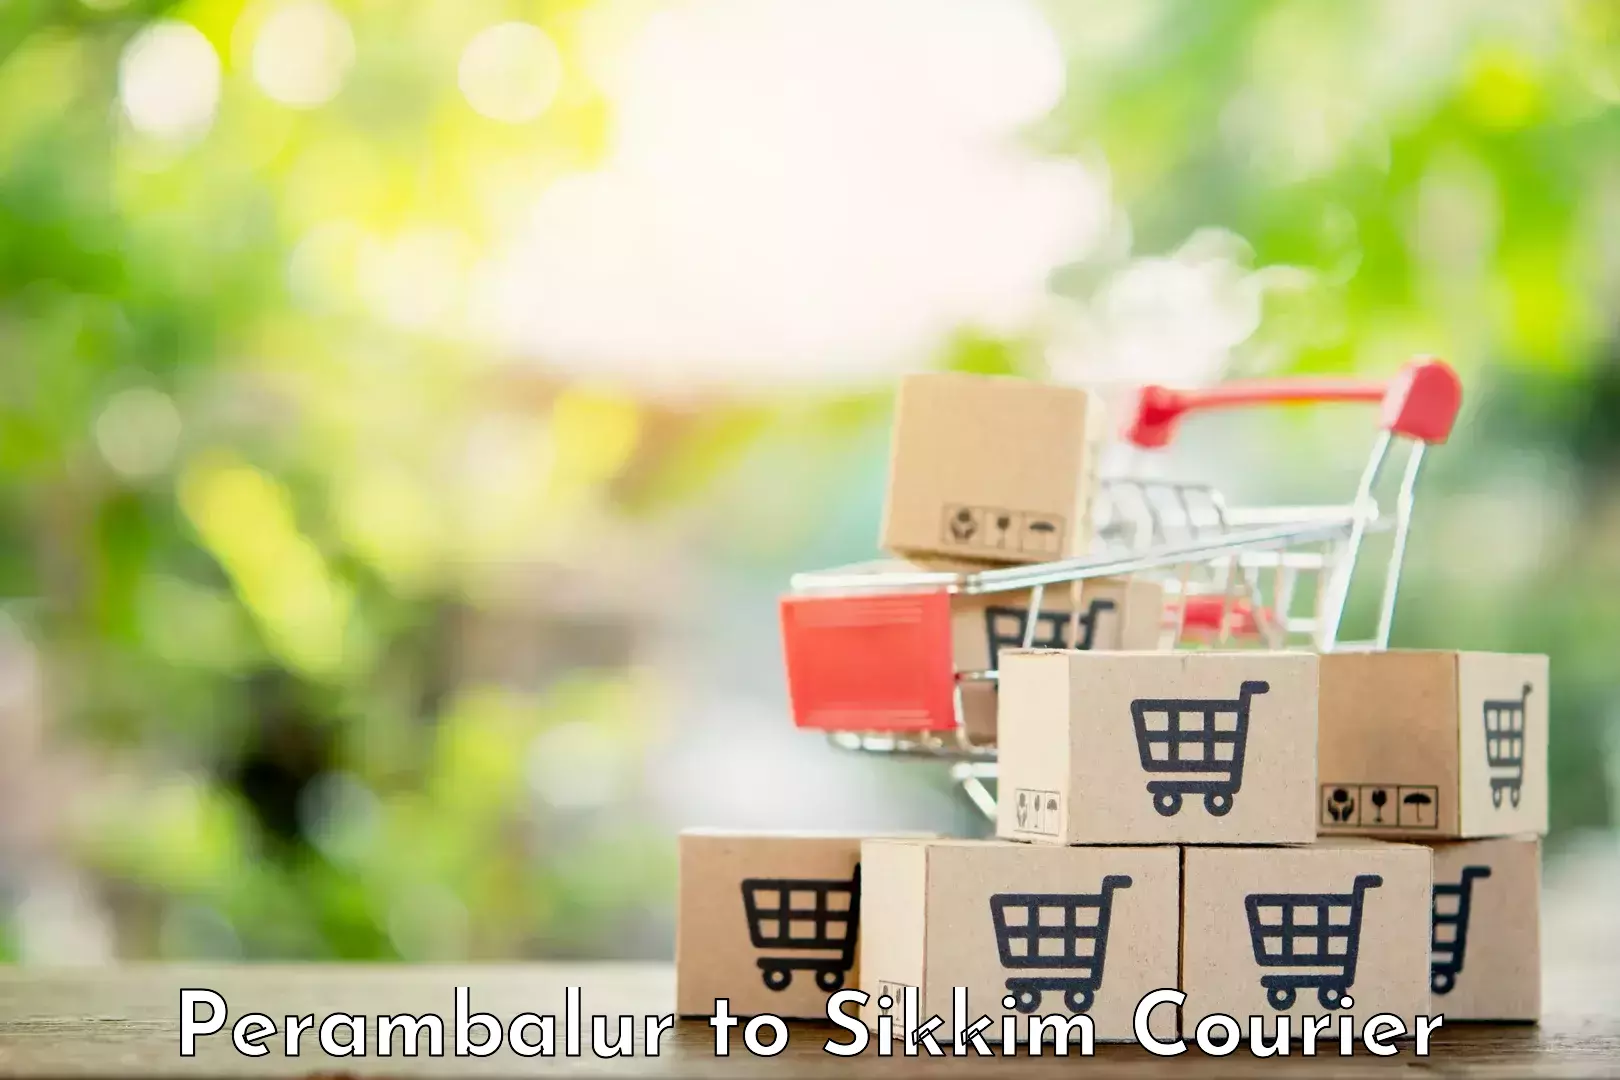 Subscription-based courier Perambalur to Pelling